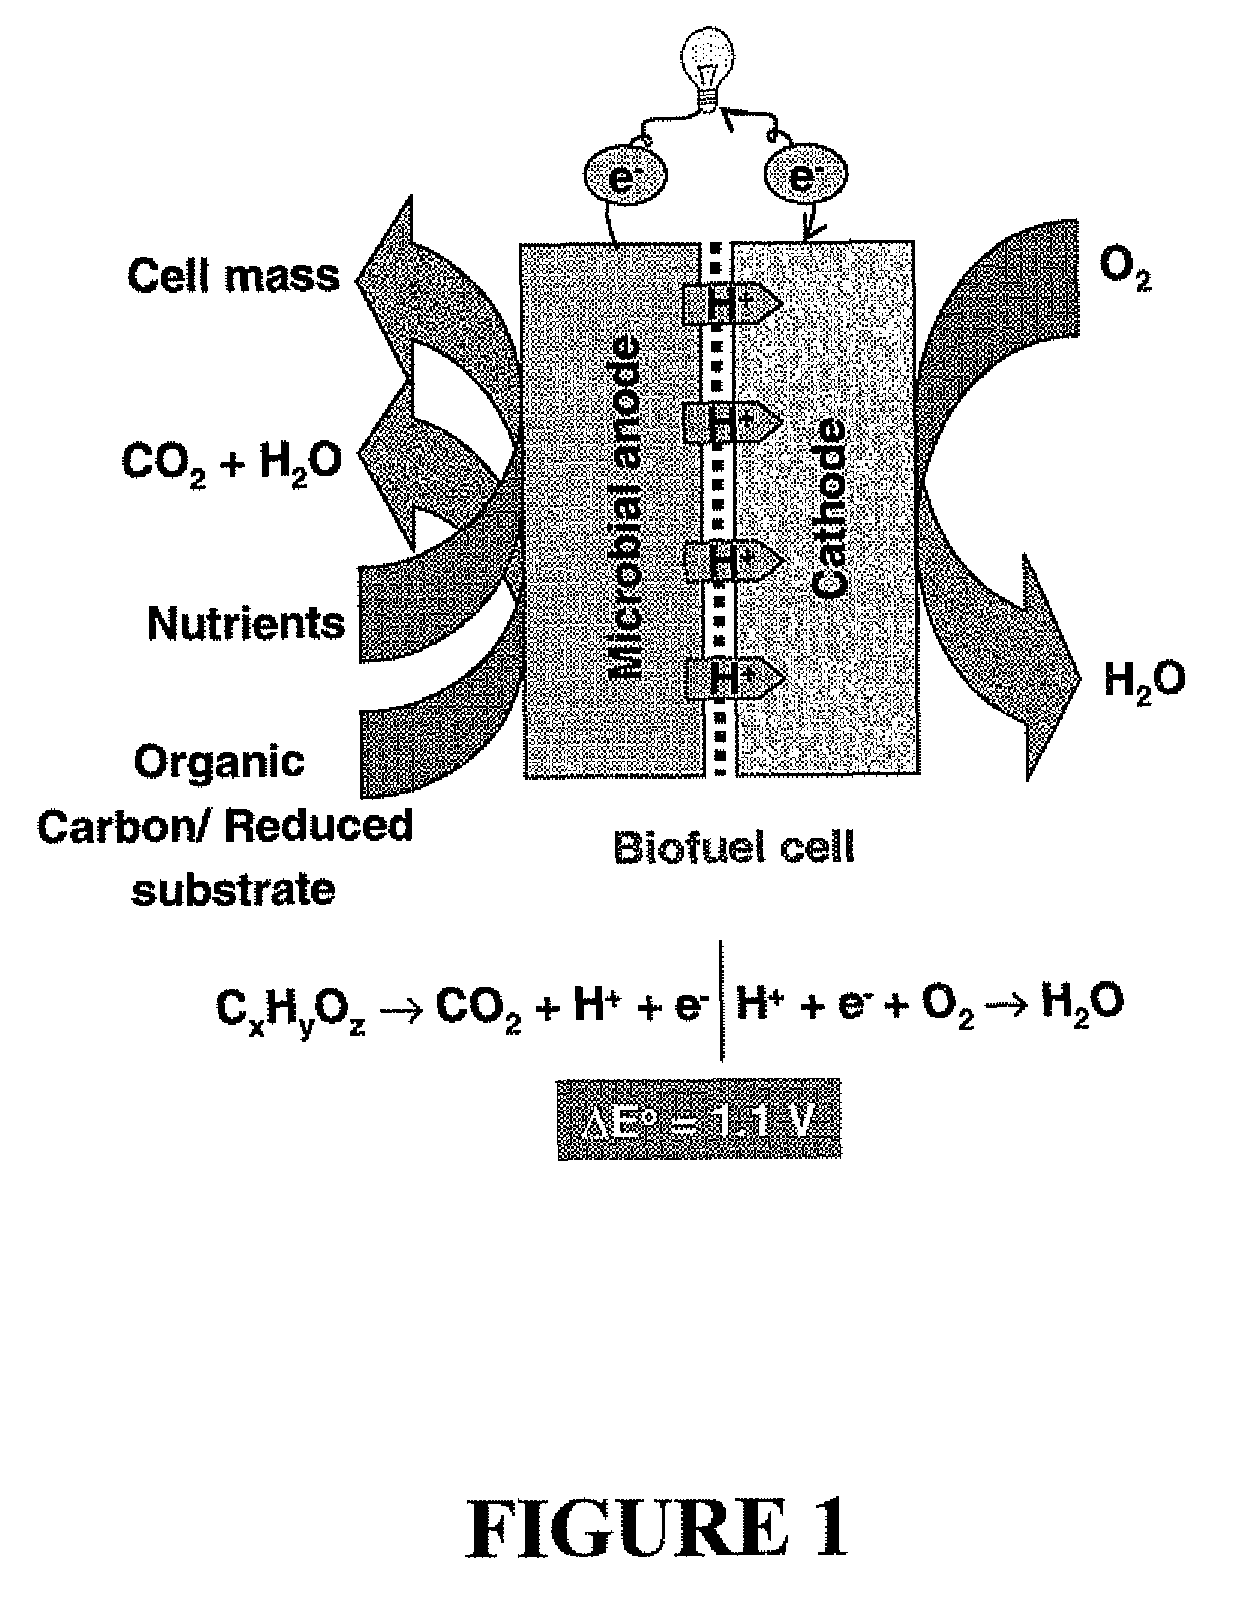 Microbial fuel cell treatment of ethanol fermentation process water